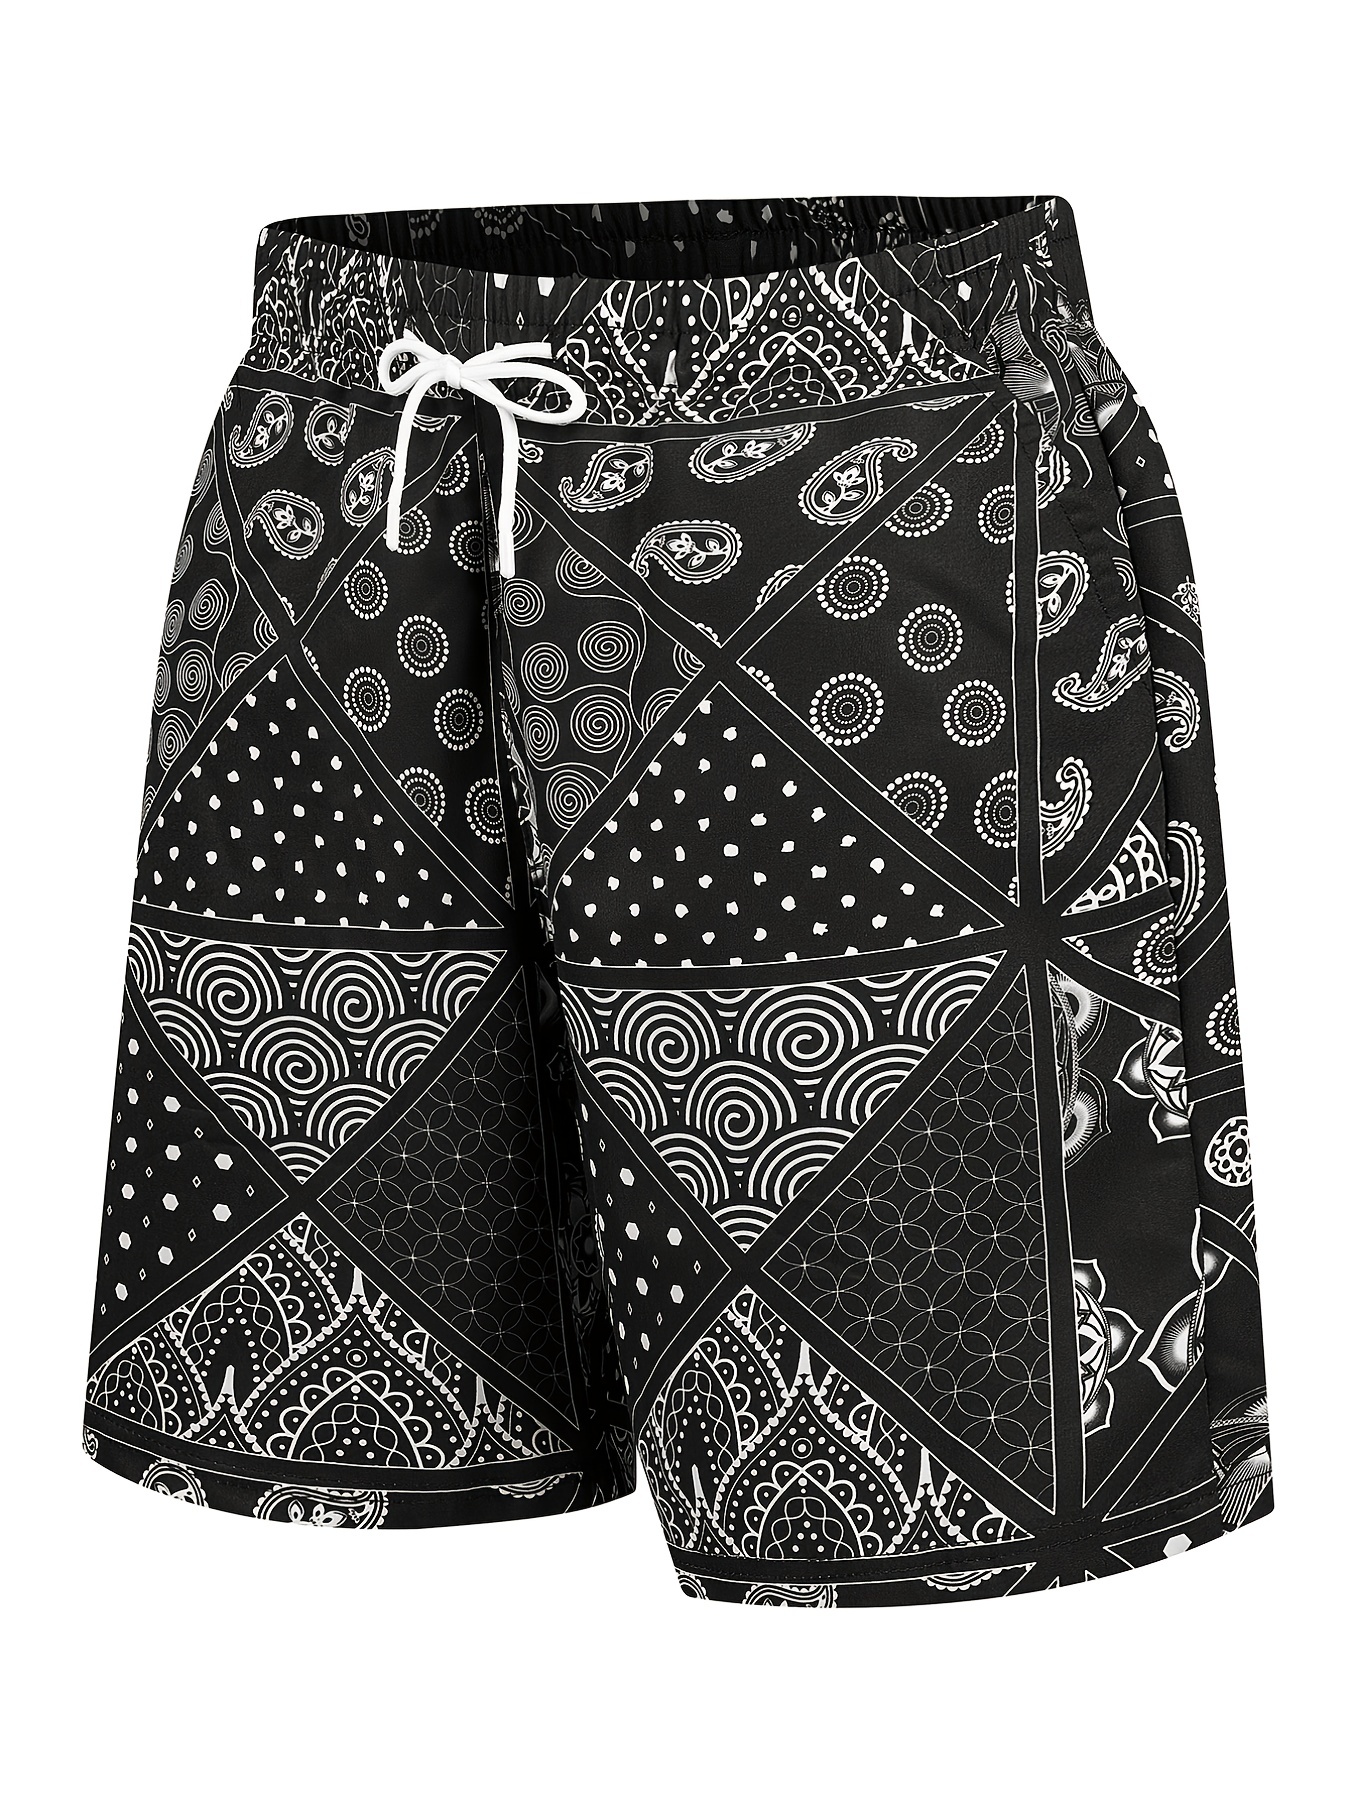 Men's Loose Beach Shorts Activewear, Drawstring Quick Dry Shorts,  Lightweight Shorts For Summer Beach Vacation Surfing